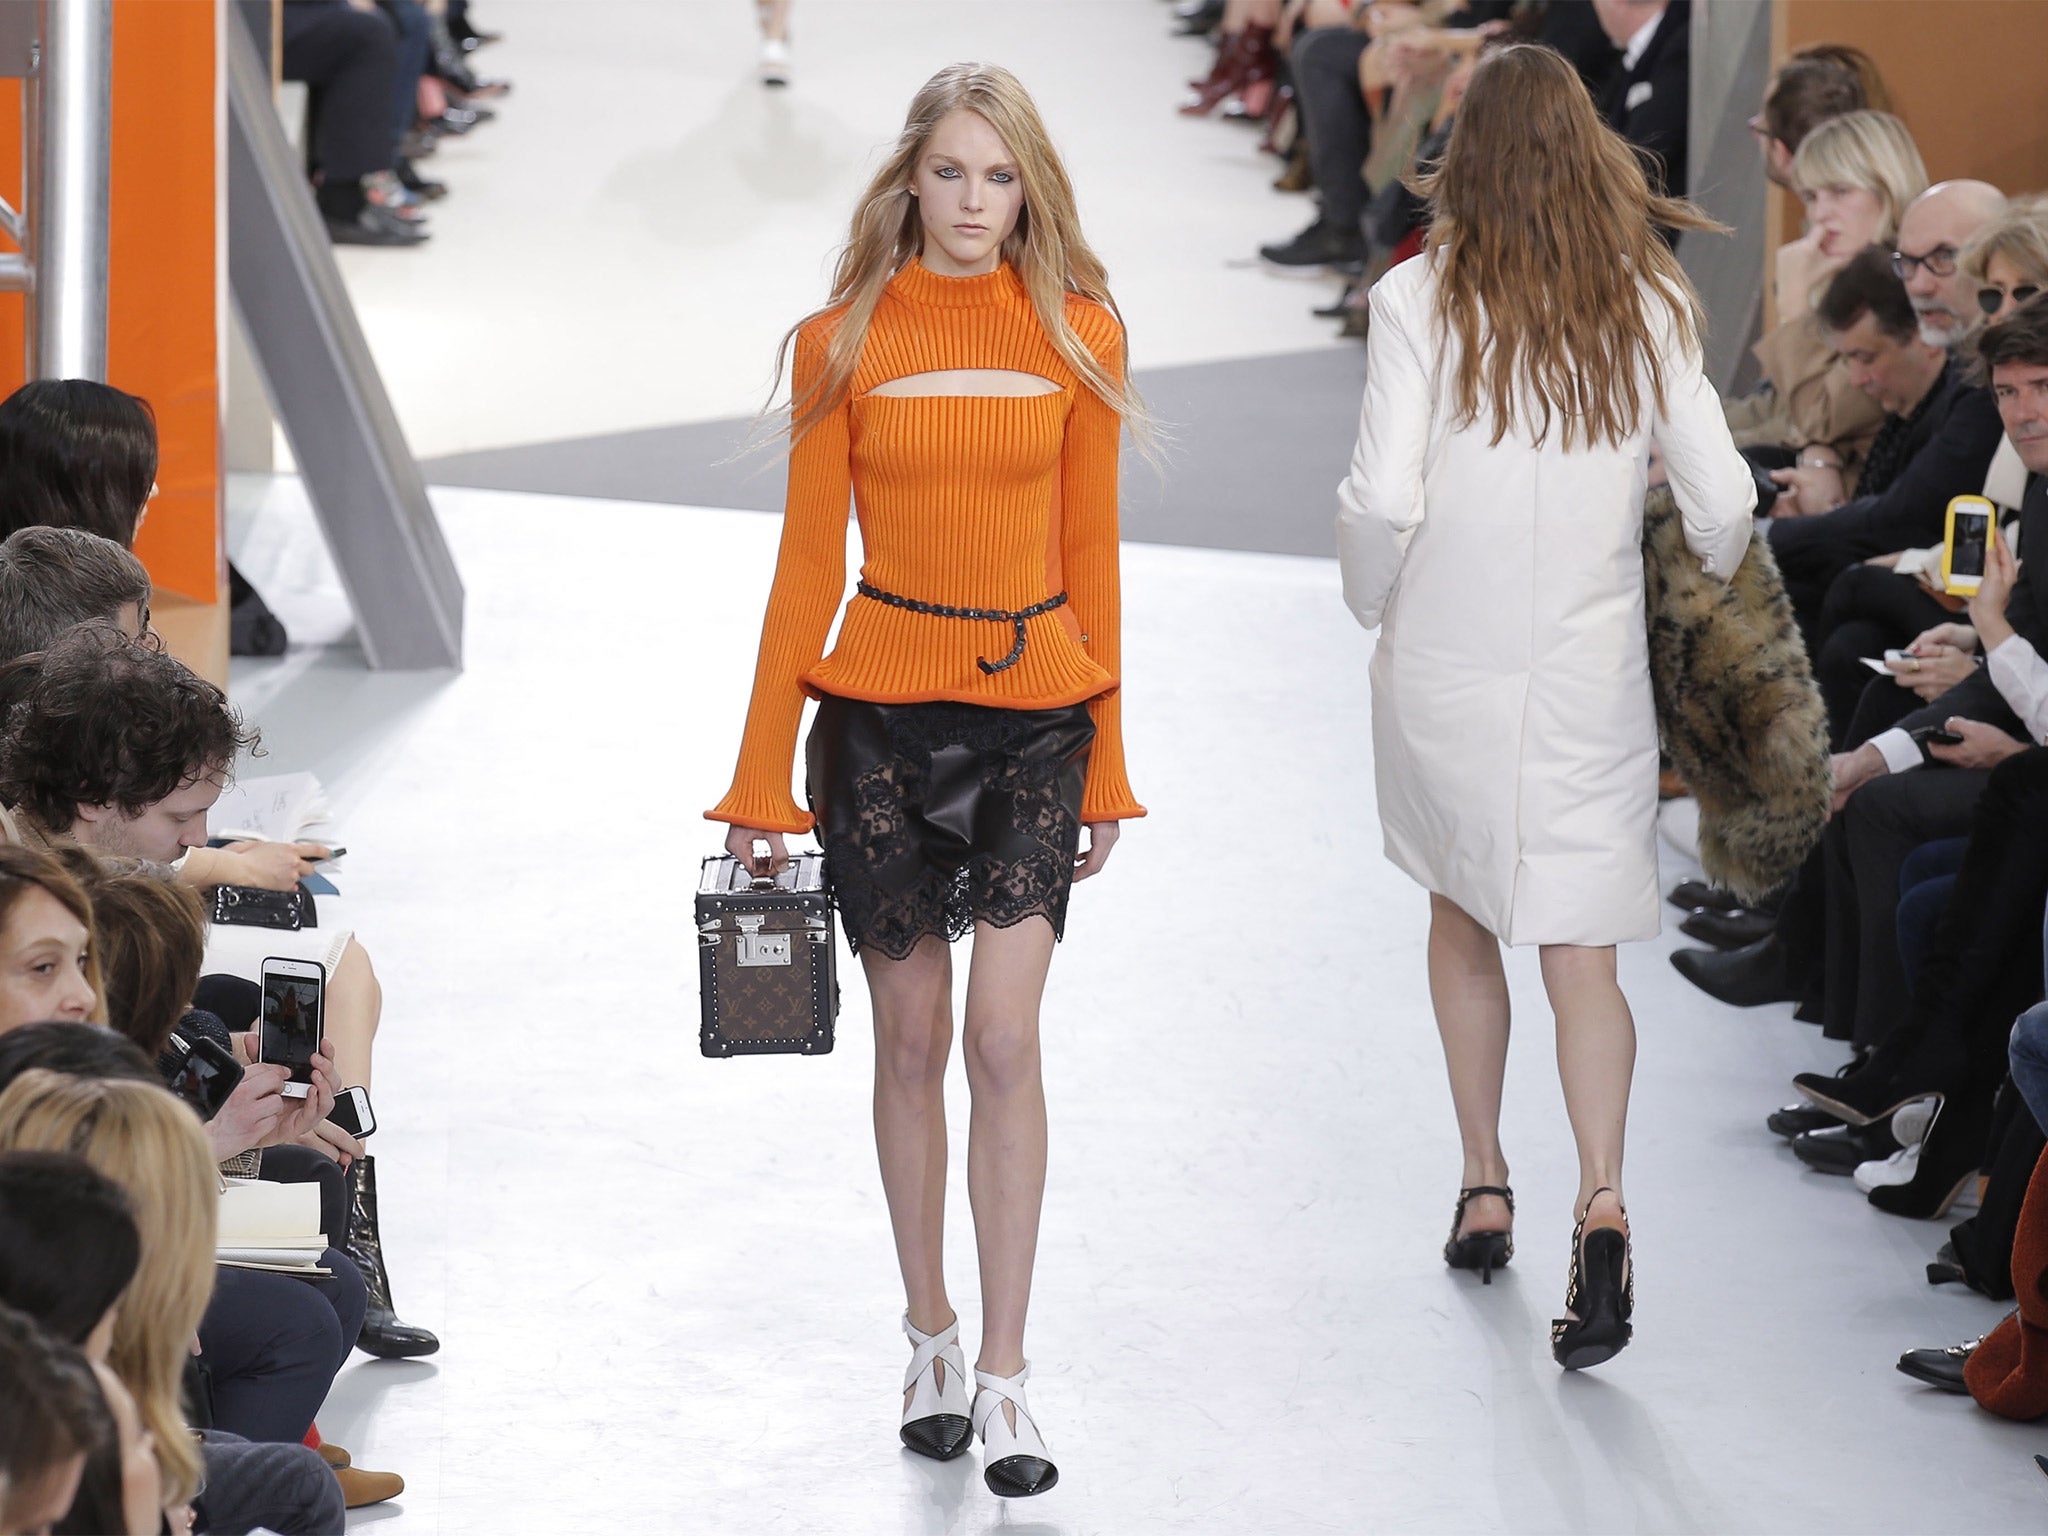 The Louis Vuitton collection was a cut above at the Paris Fashion Week autumn/winter show yesterday